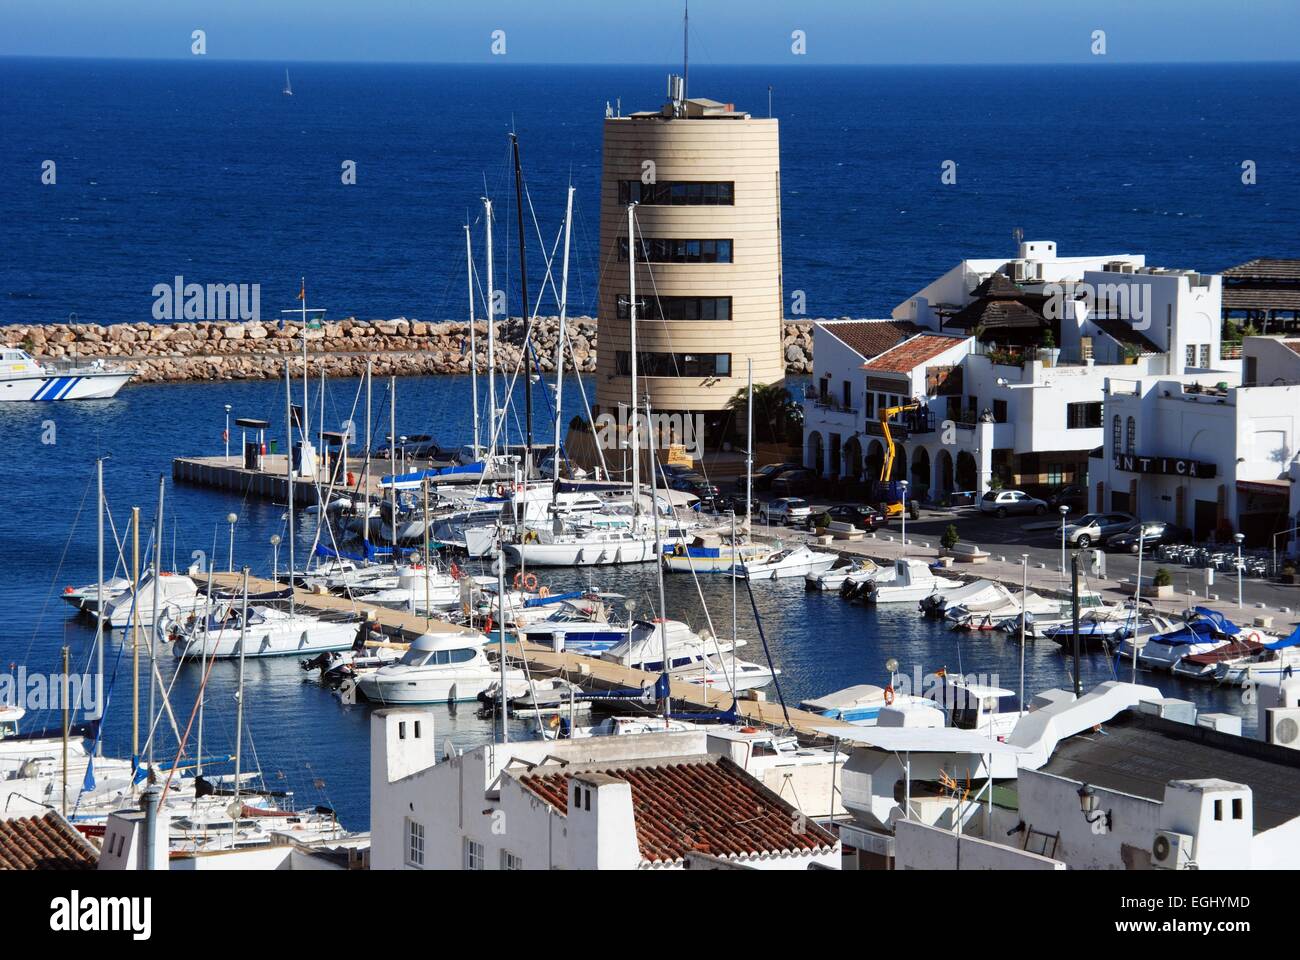 View of the harbour and watchtower, Roquetas de Mar, Almeria Province, Andalusia, Spain, Western Europe. Stock Photo